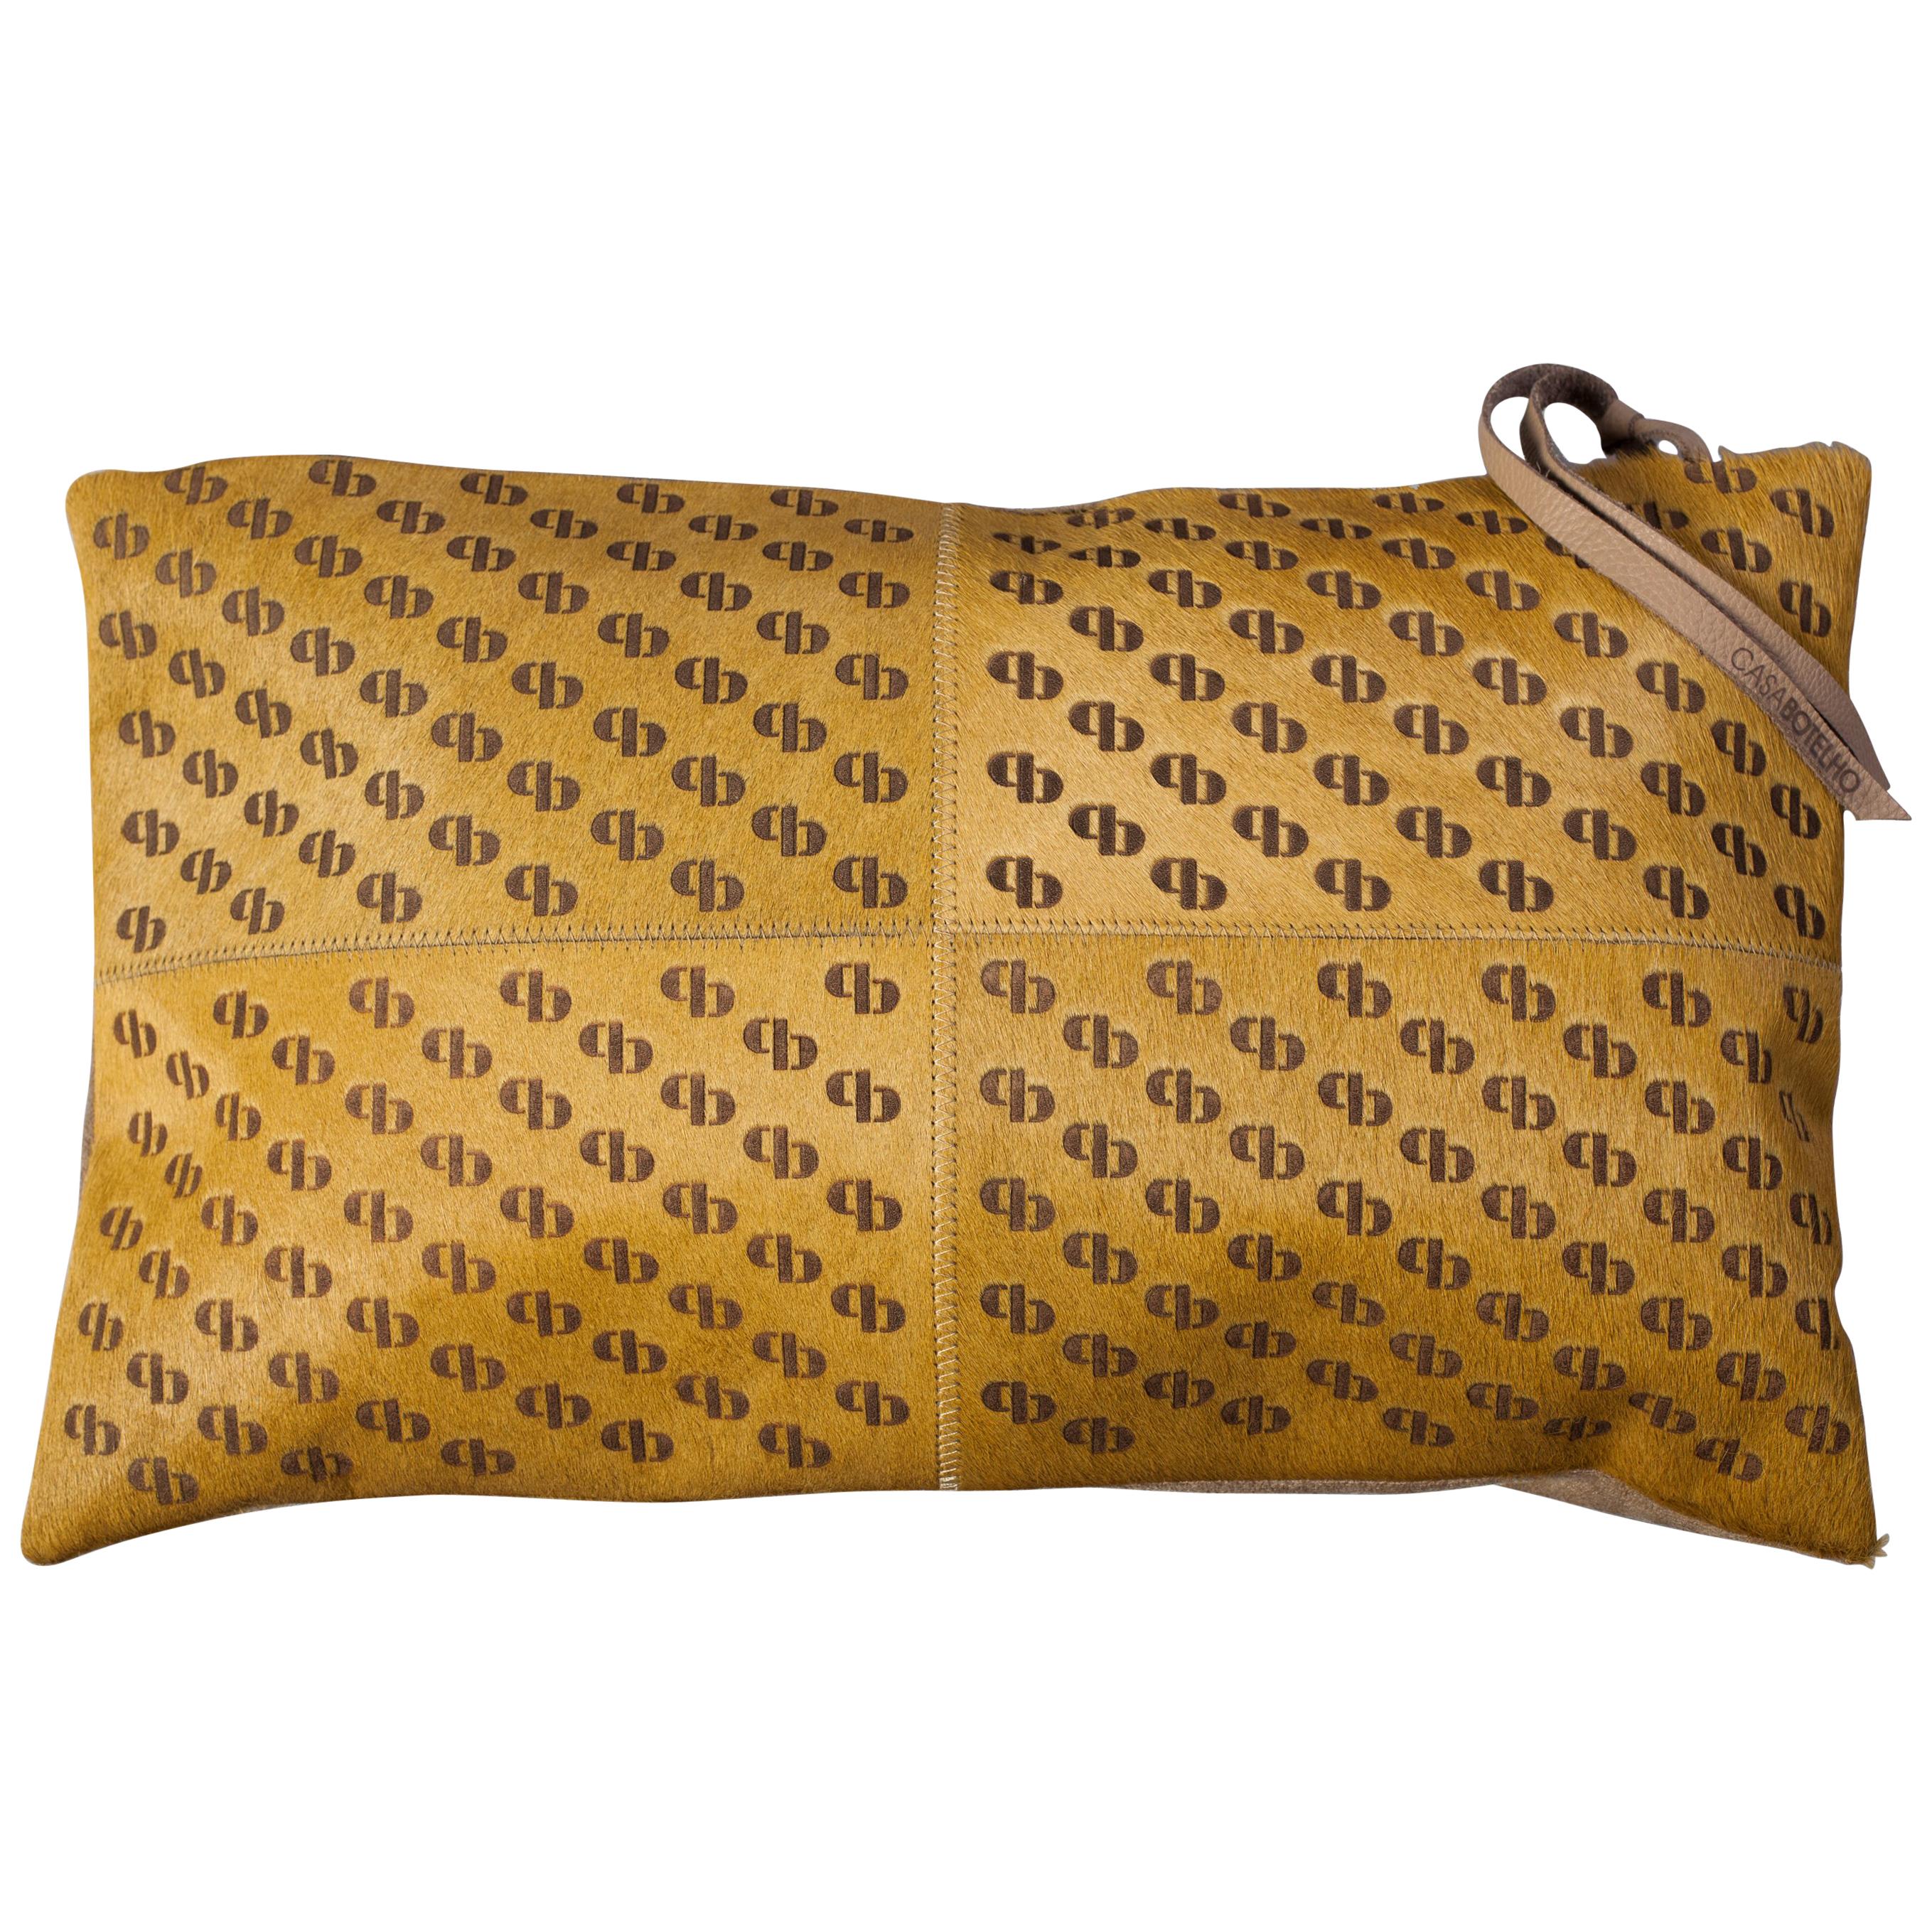 Patterned Cowhide Cushions Mustard with Suedette Back and Leather Zip Tassels